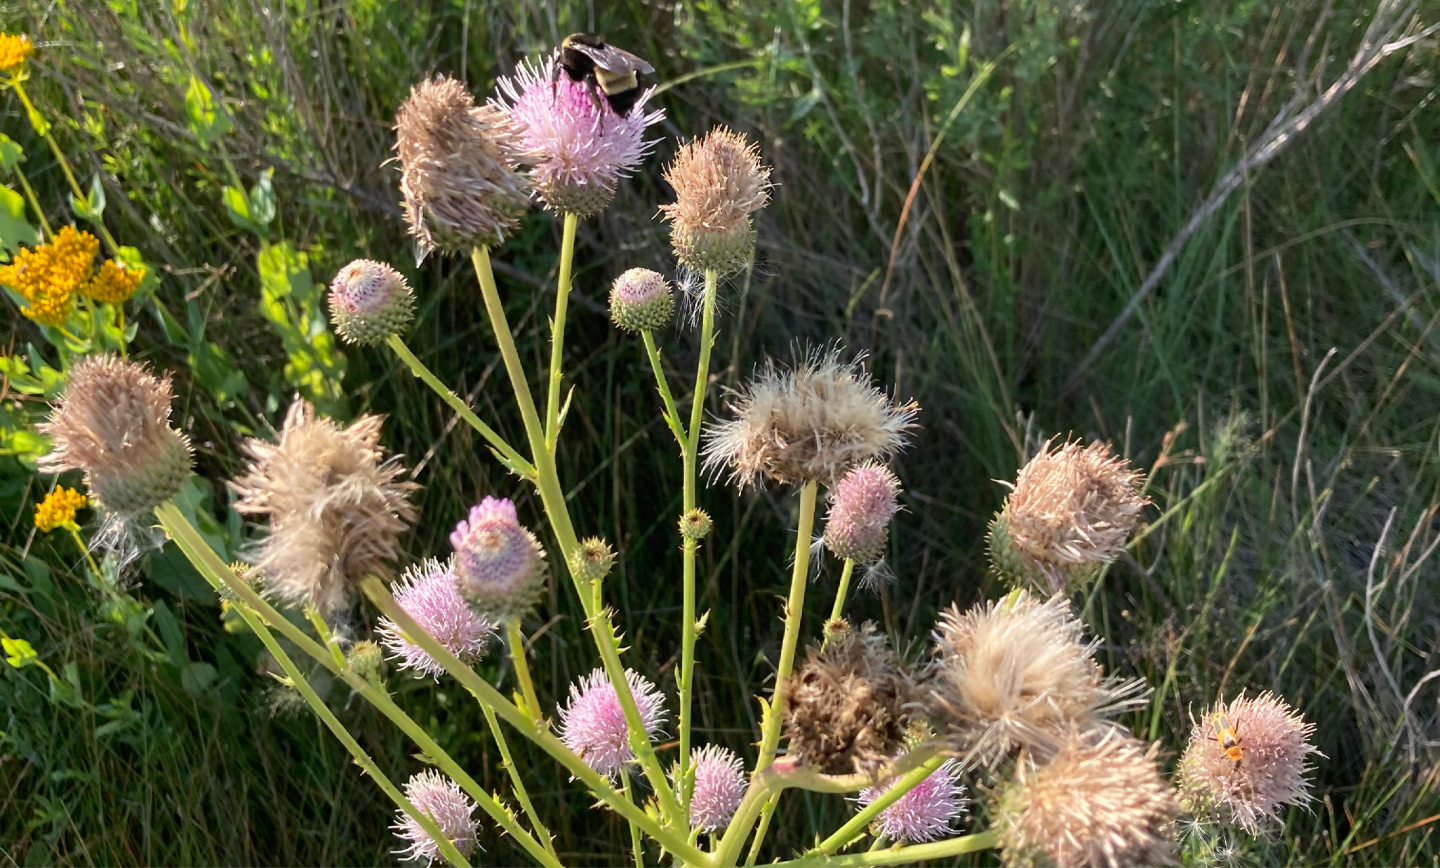 A bristly flowered plant with light pinkish thistles. A bee Sits atop a flower.